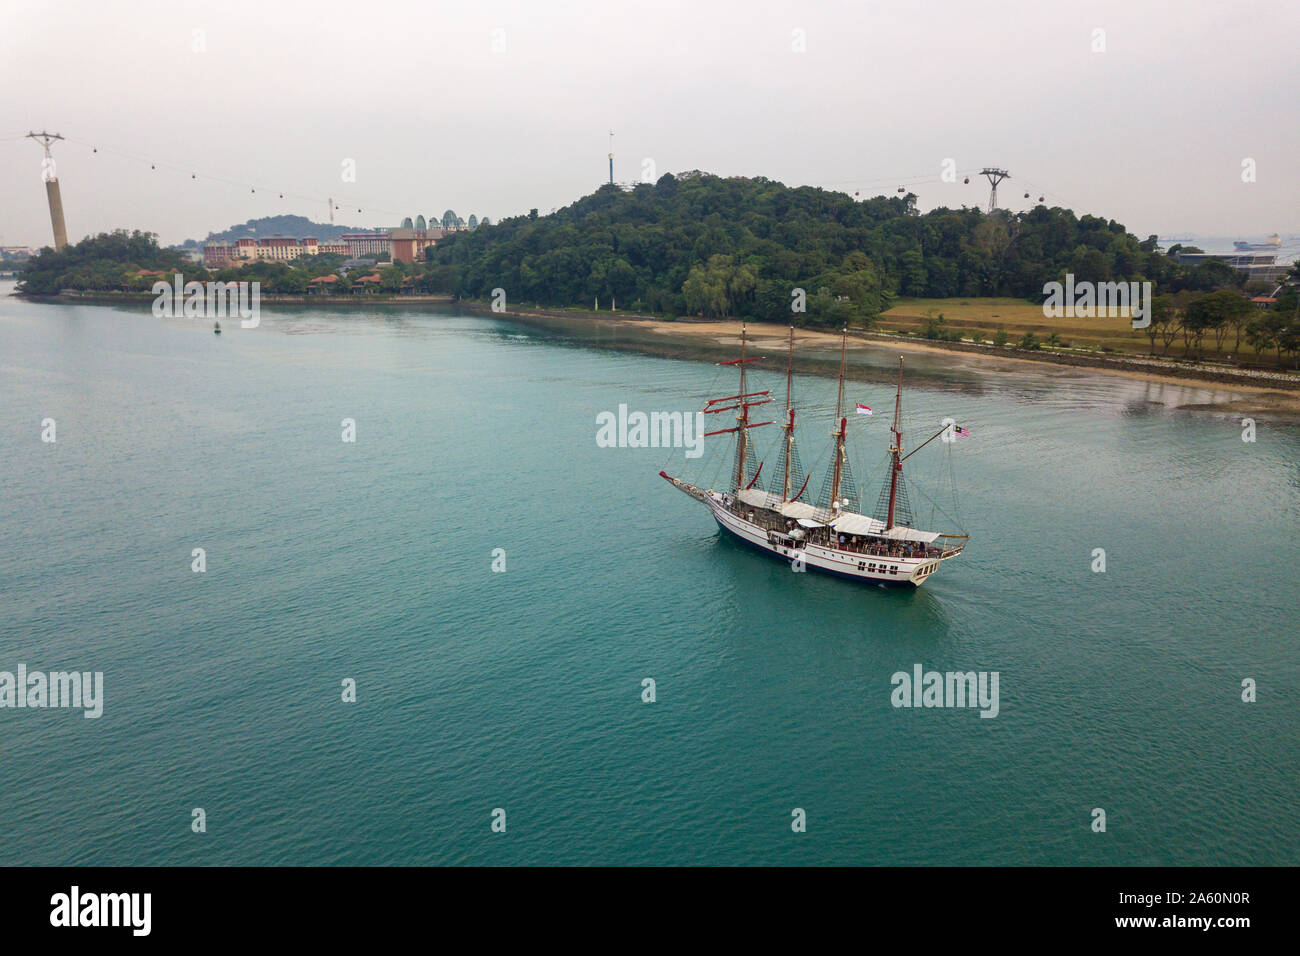 Aerial view of a sailing boat entering Keppel Bay, Singapore Stock Photo